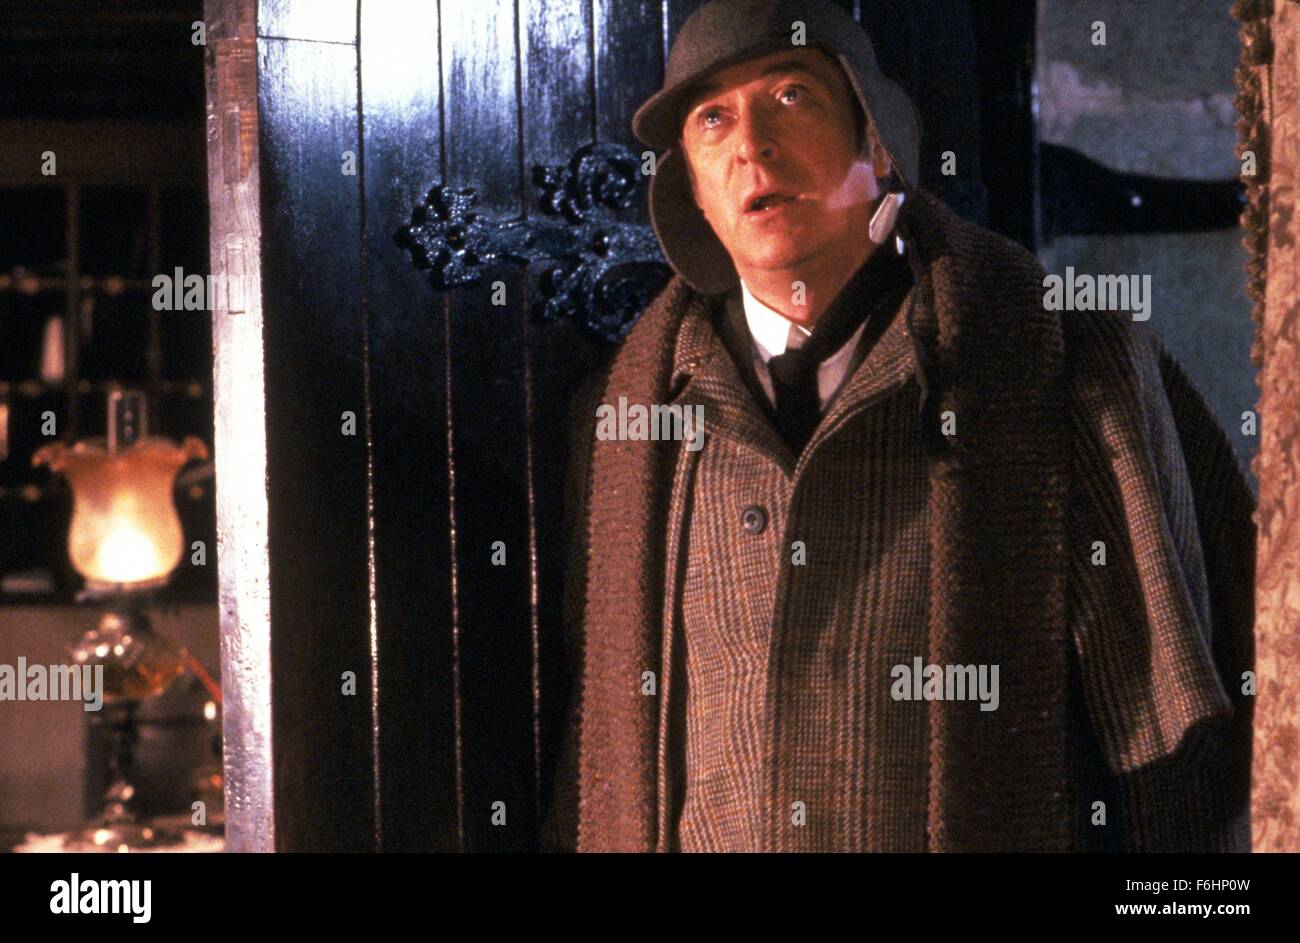 1988, Film Title: WITHOUT A CLUE, Director: THOM EBERHARDT, Pictured: MICHAEL CAINE, CHARACTER, THOM EBERHARDT. (Credit Image: SNAP) Stock Photo